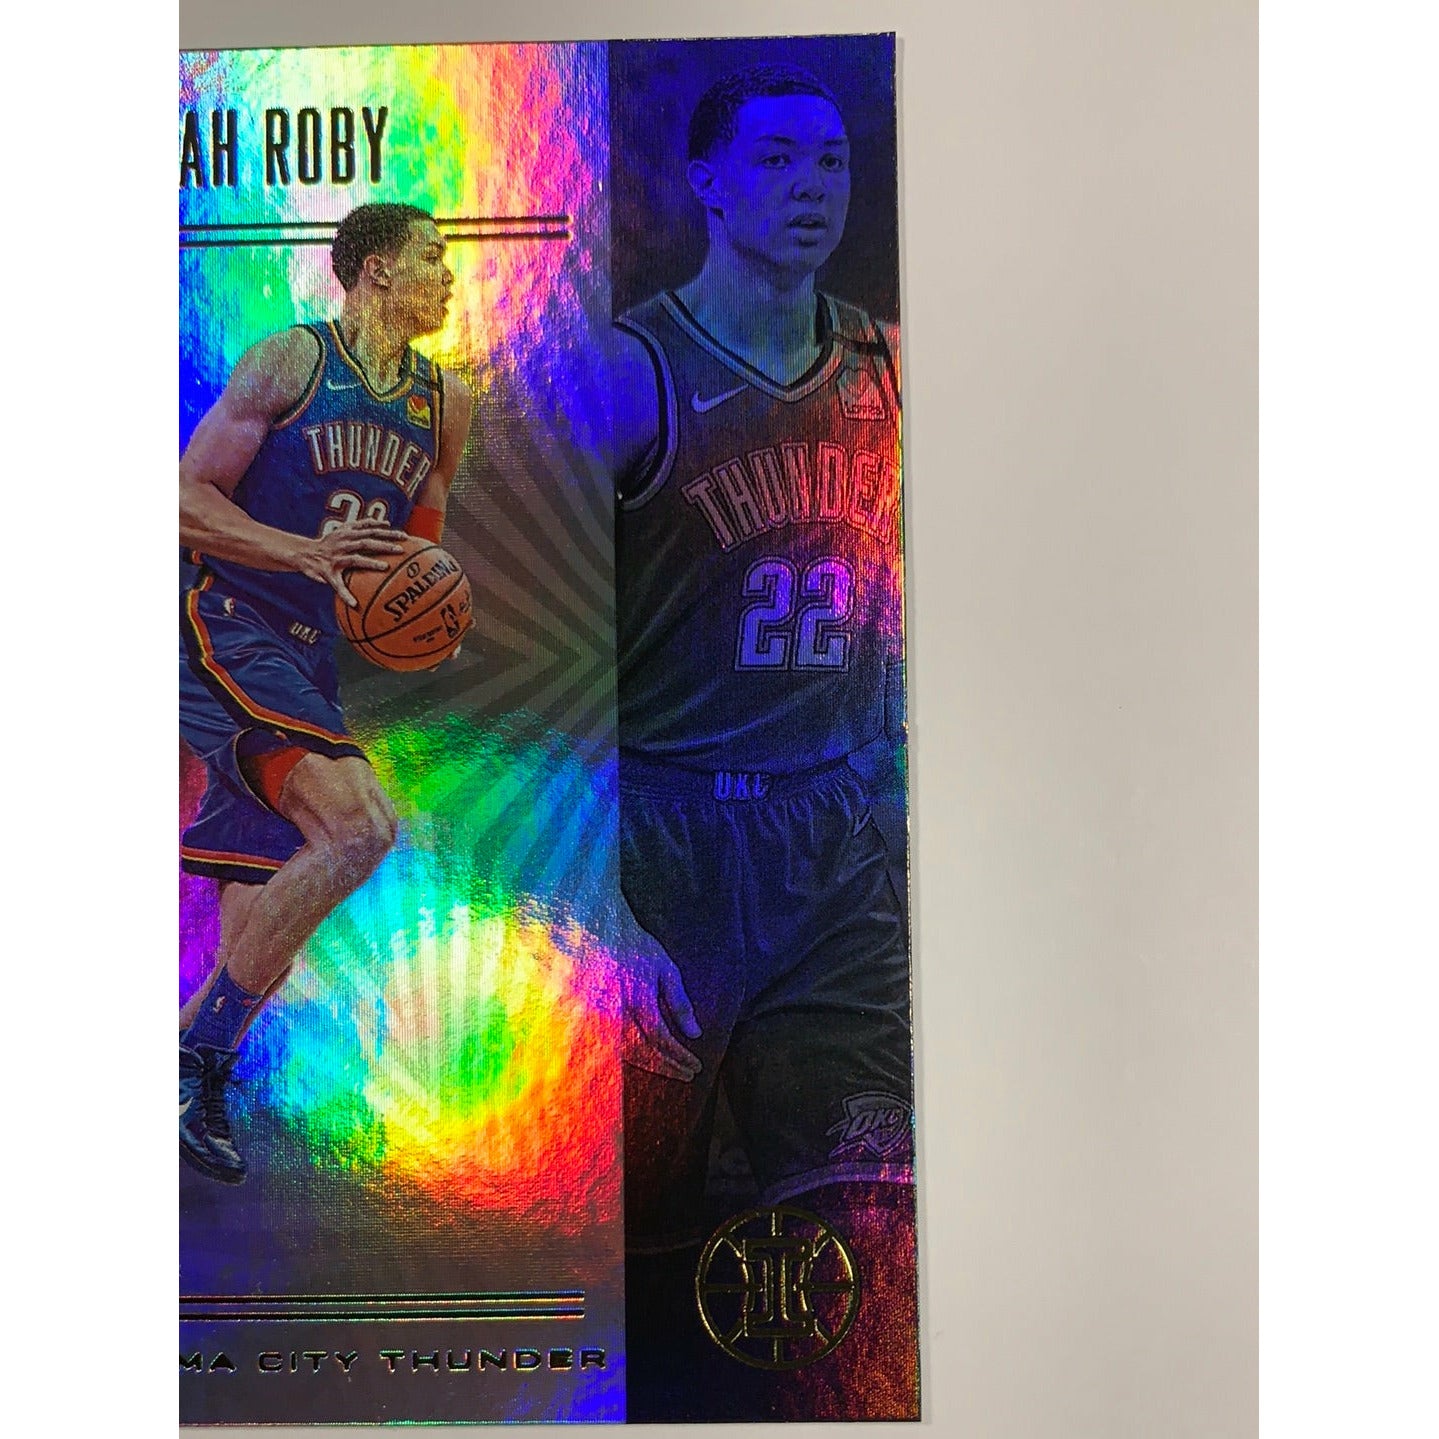  2019-20 Illusions Isaiah Roby RC  Local Legends Cards & Collectibles